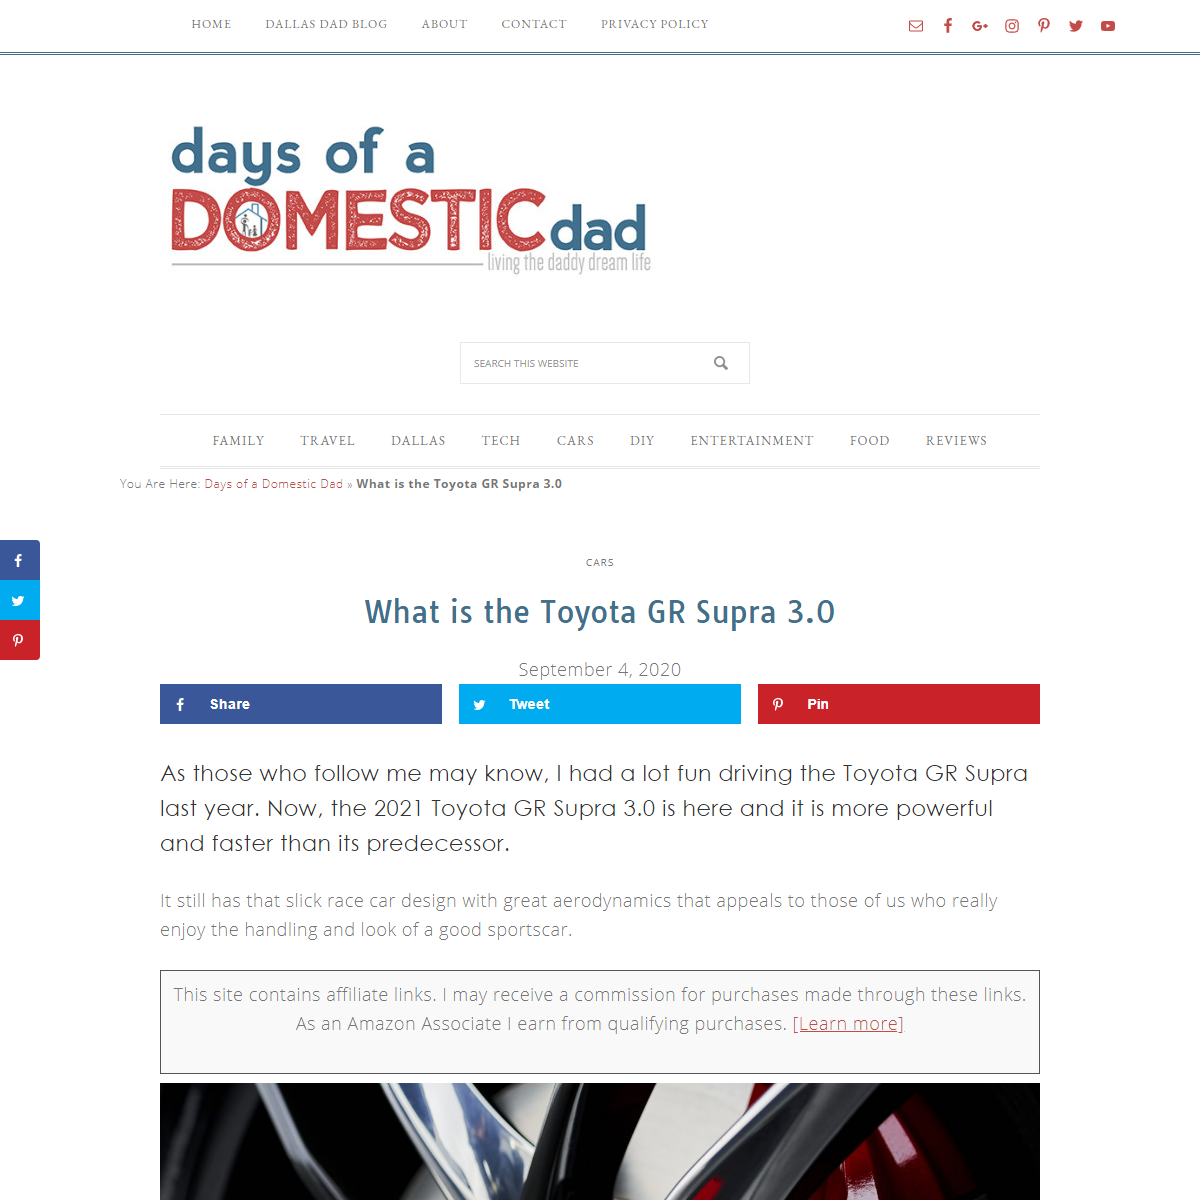 A complete backup of https://daysofadomesticdad.com/what-is-the-toyota-gr-supra-3-0/